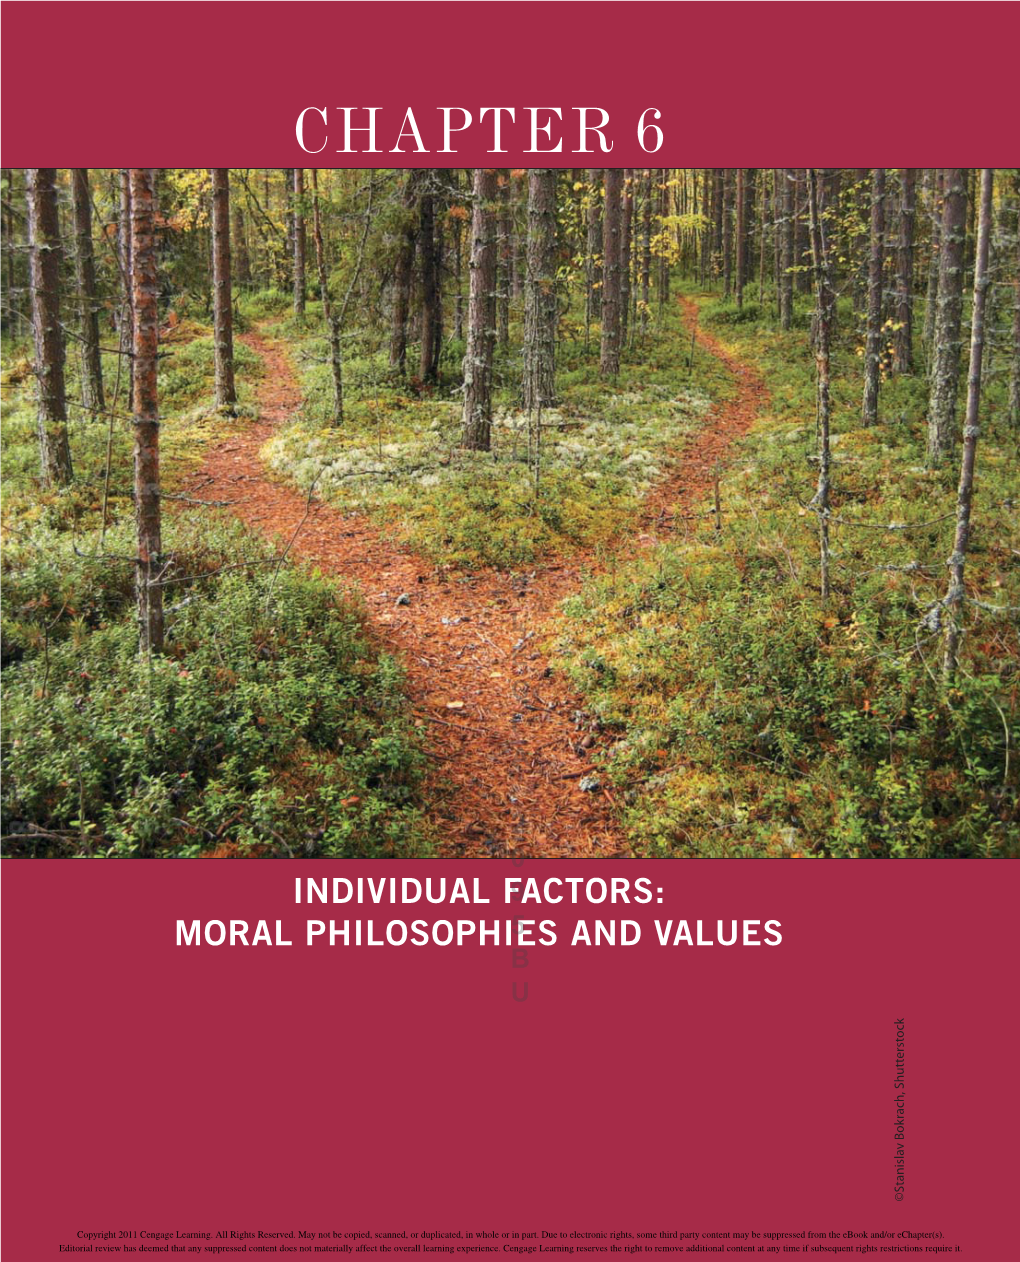 Individual Factors: Moral Philosophies and Values 153